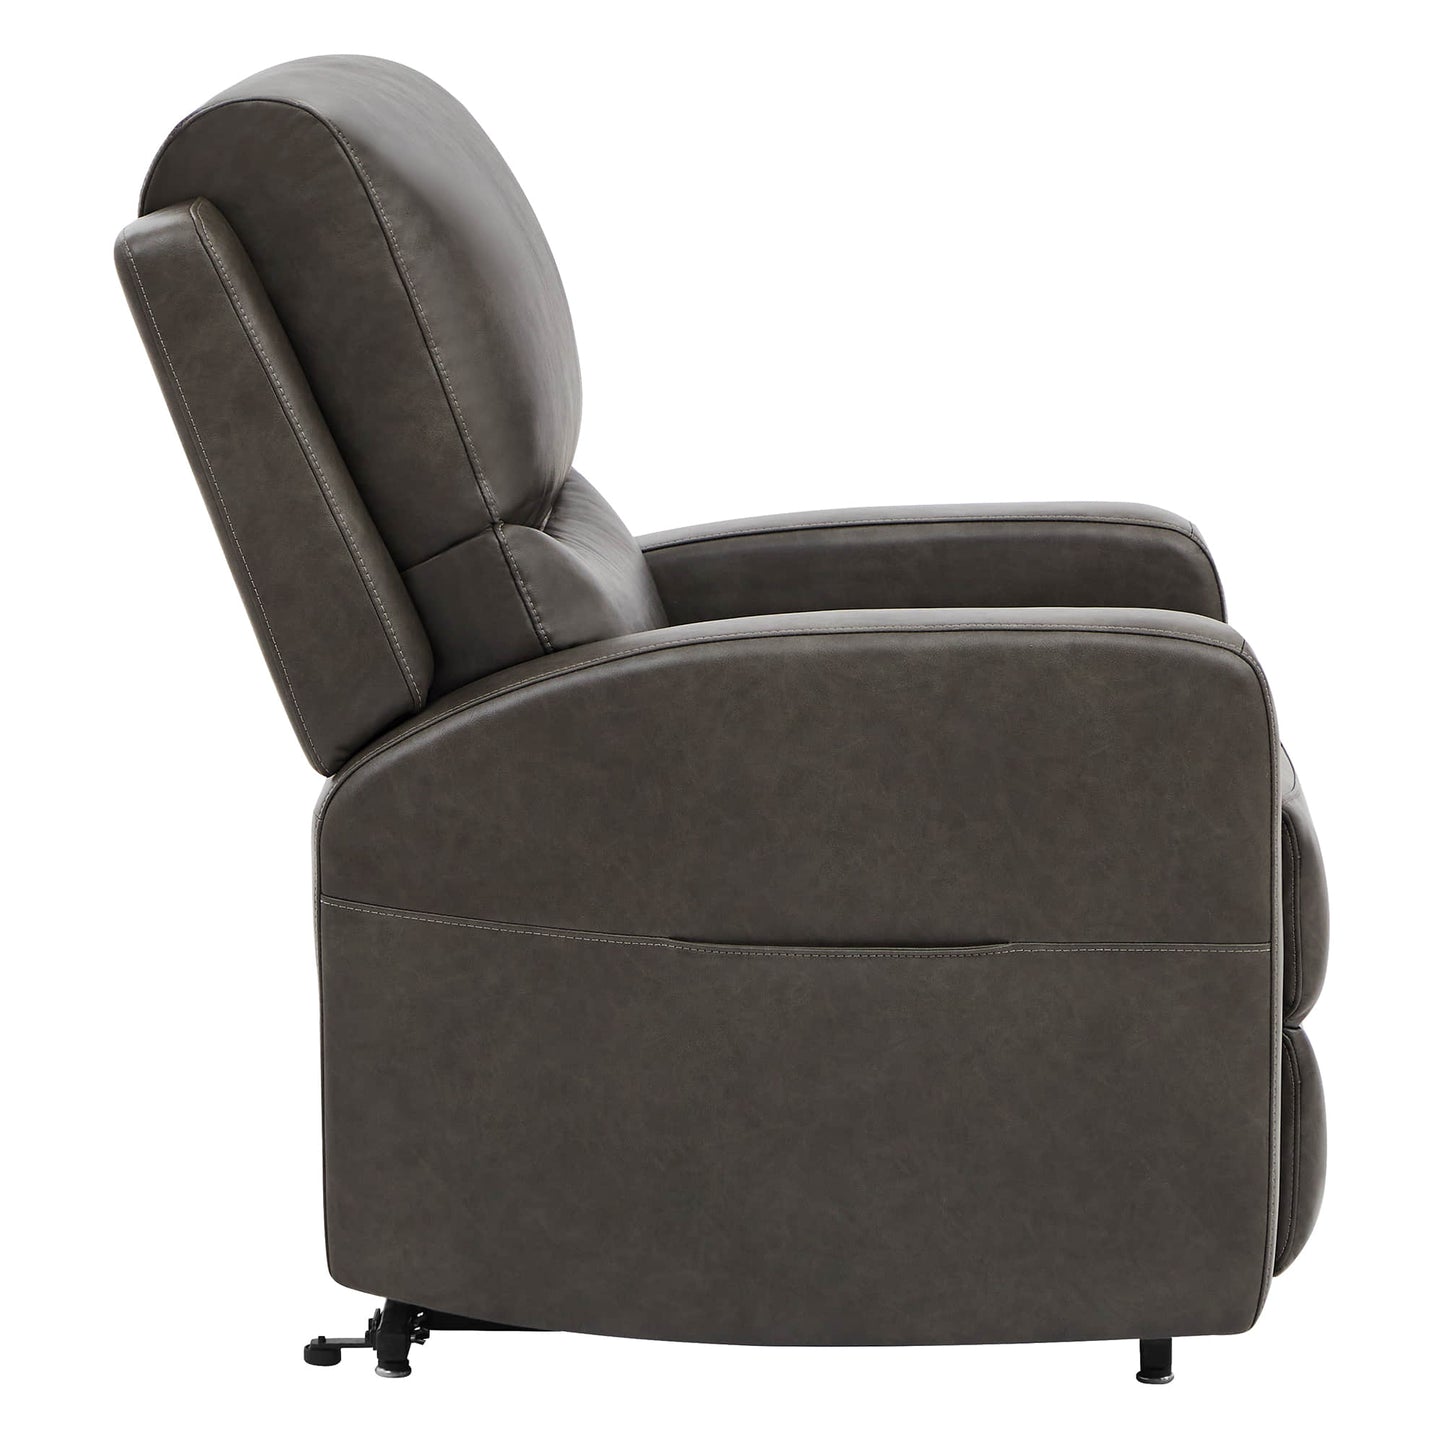 CHITA LIVING-Finley Power Lift Chair Recliner For Elderly-Lift Chair-Faux Leather-Dark Grey-